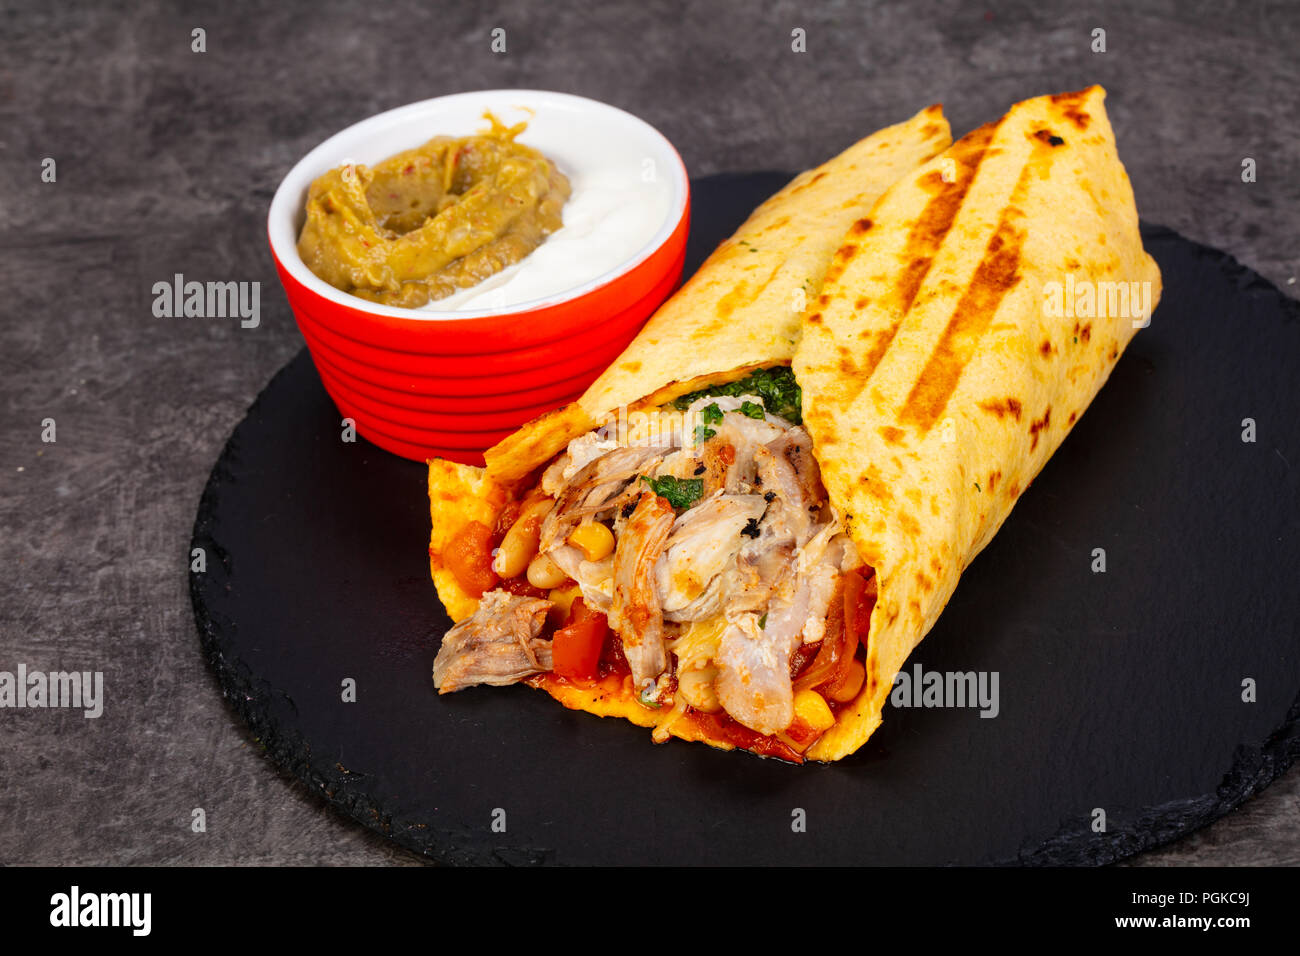 Burrito with meat and sauce Stock Photo - Alamy